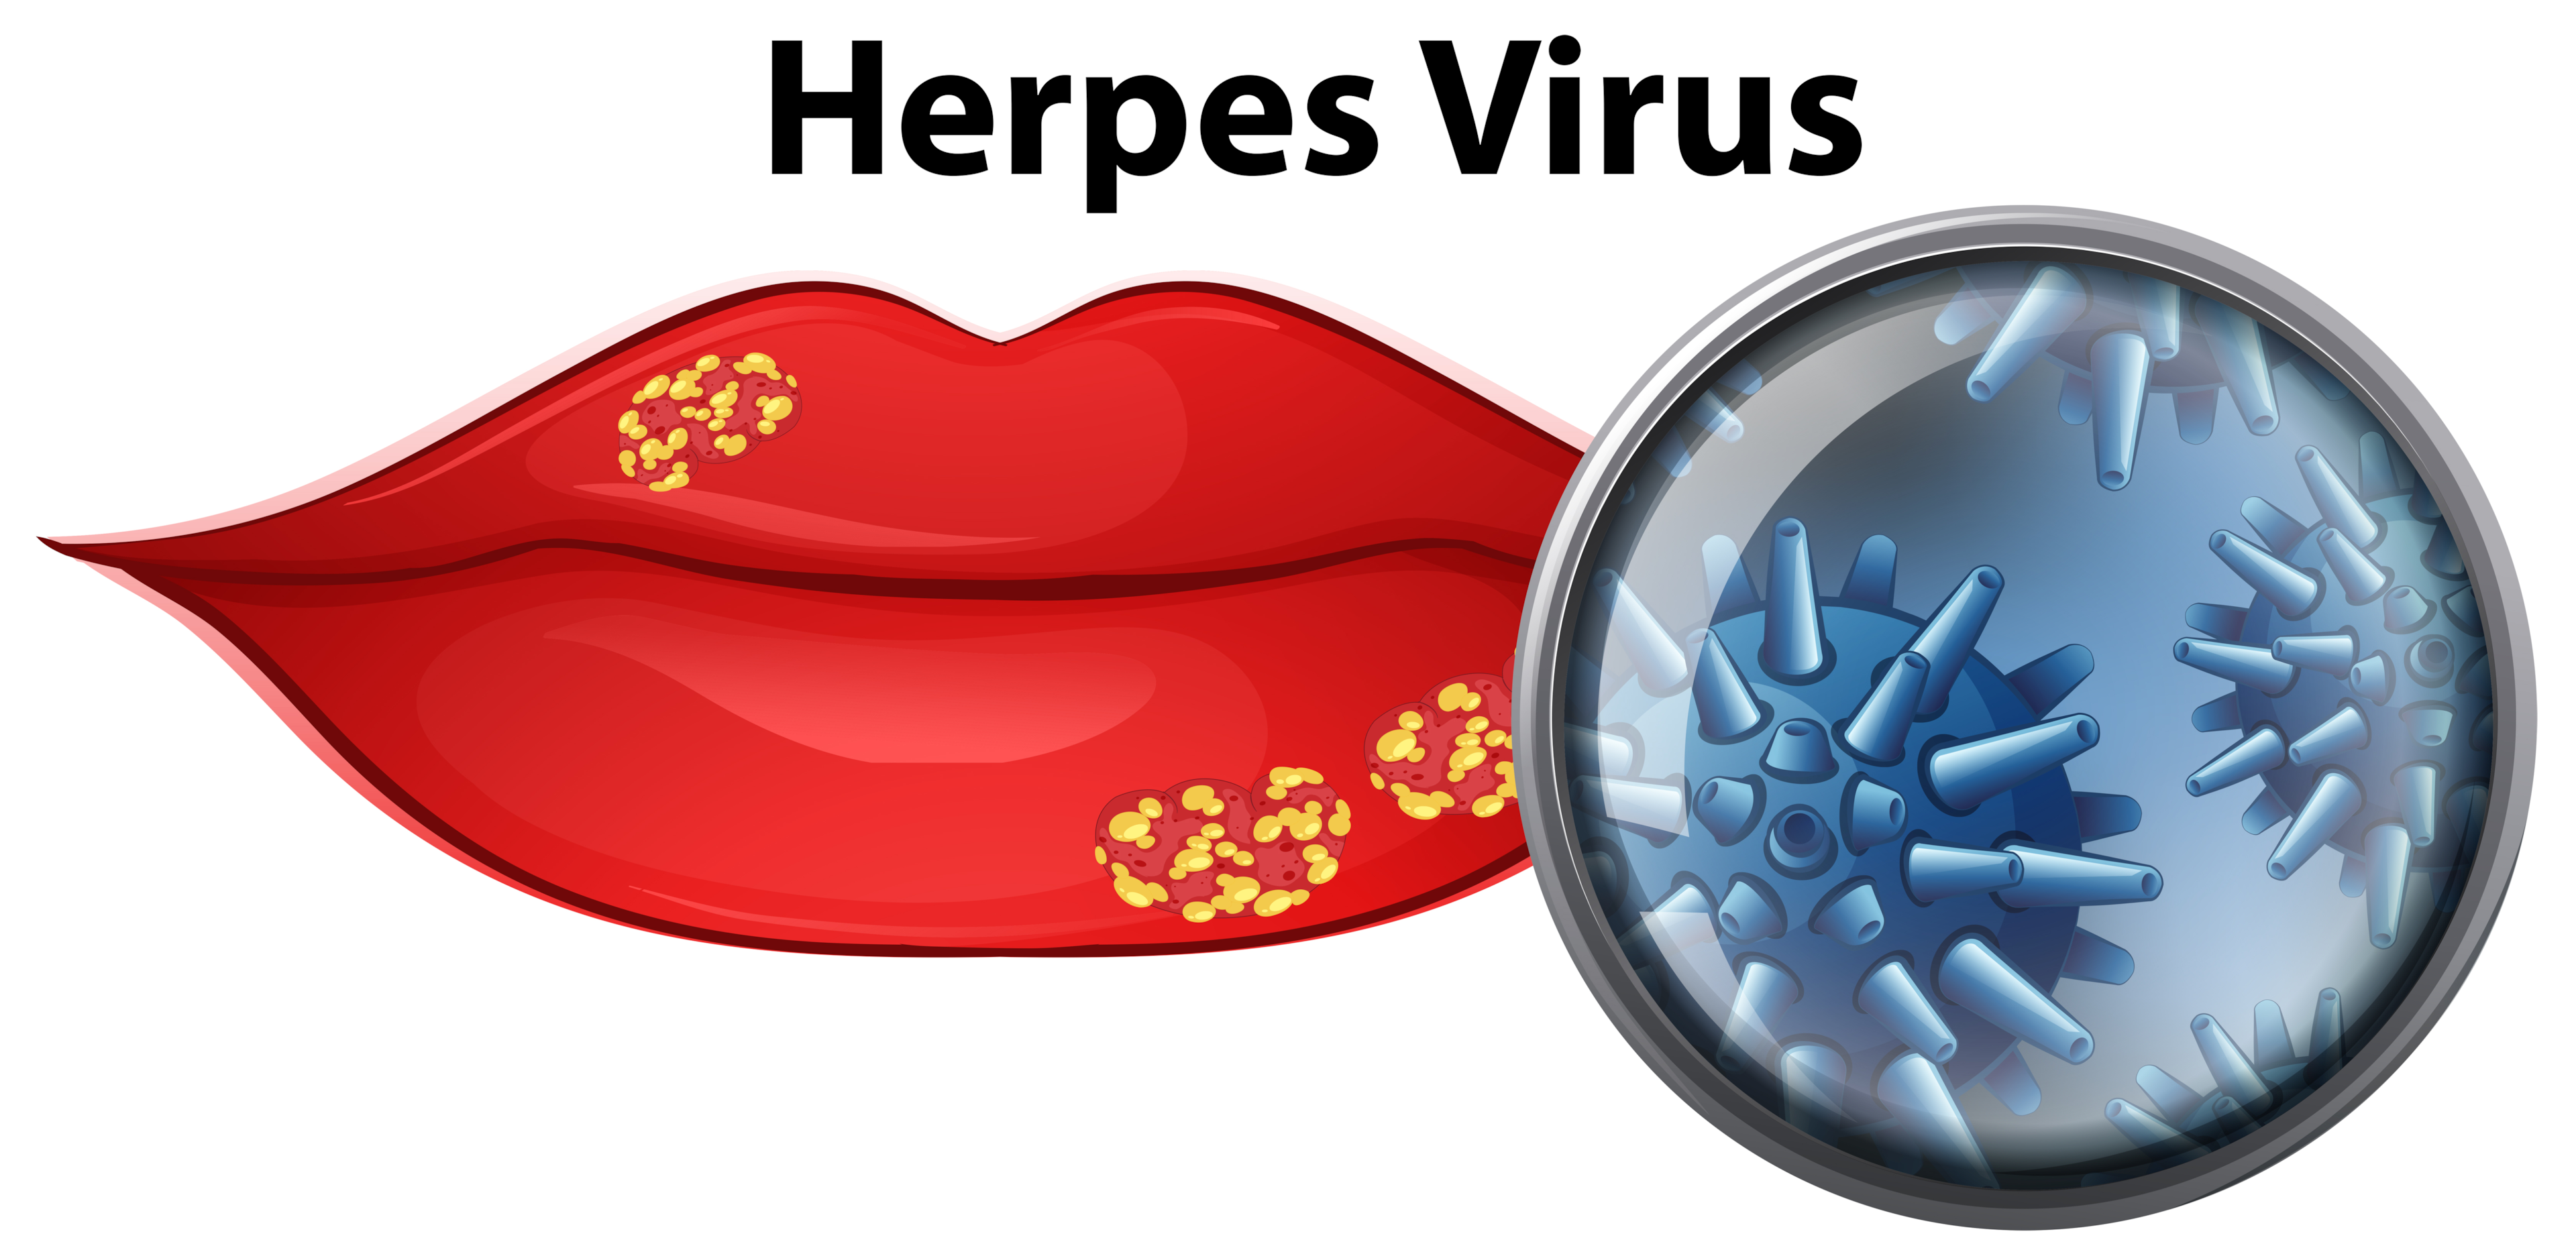 Herpes virus has a special love for your lips.